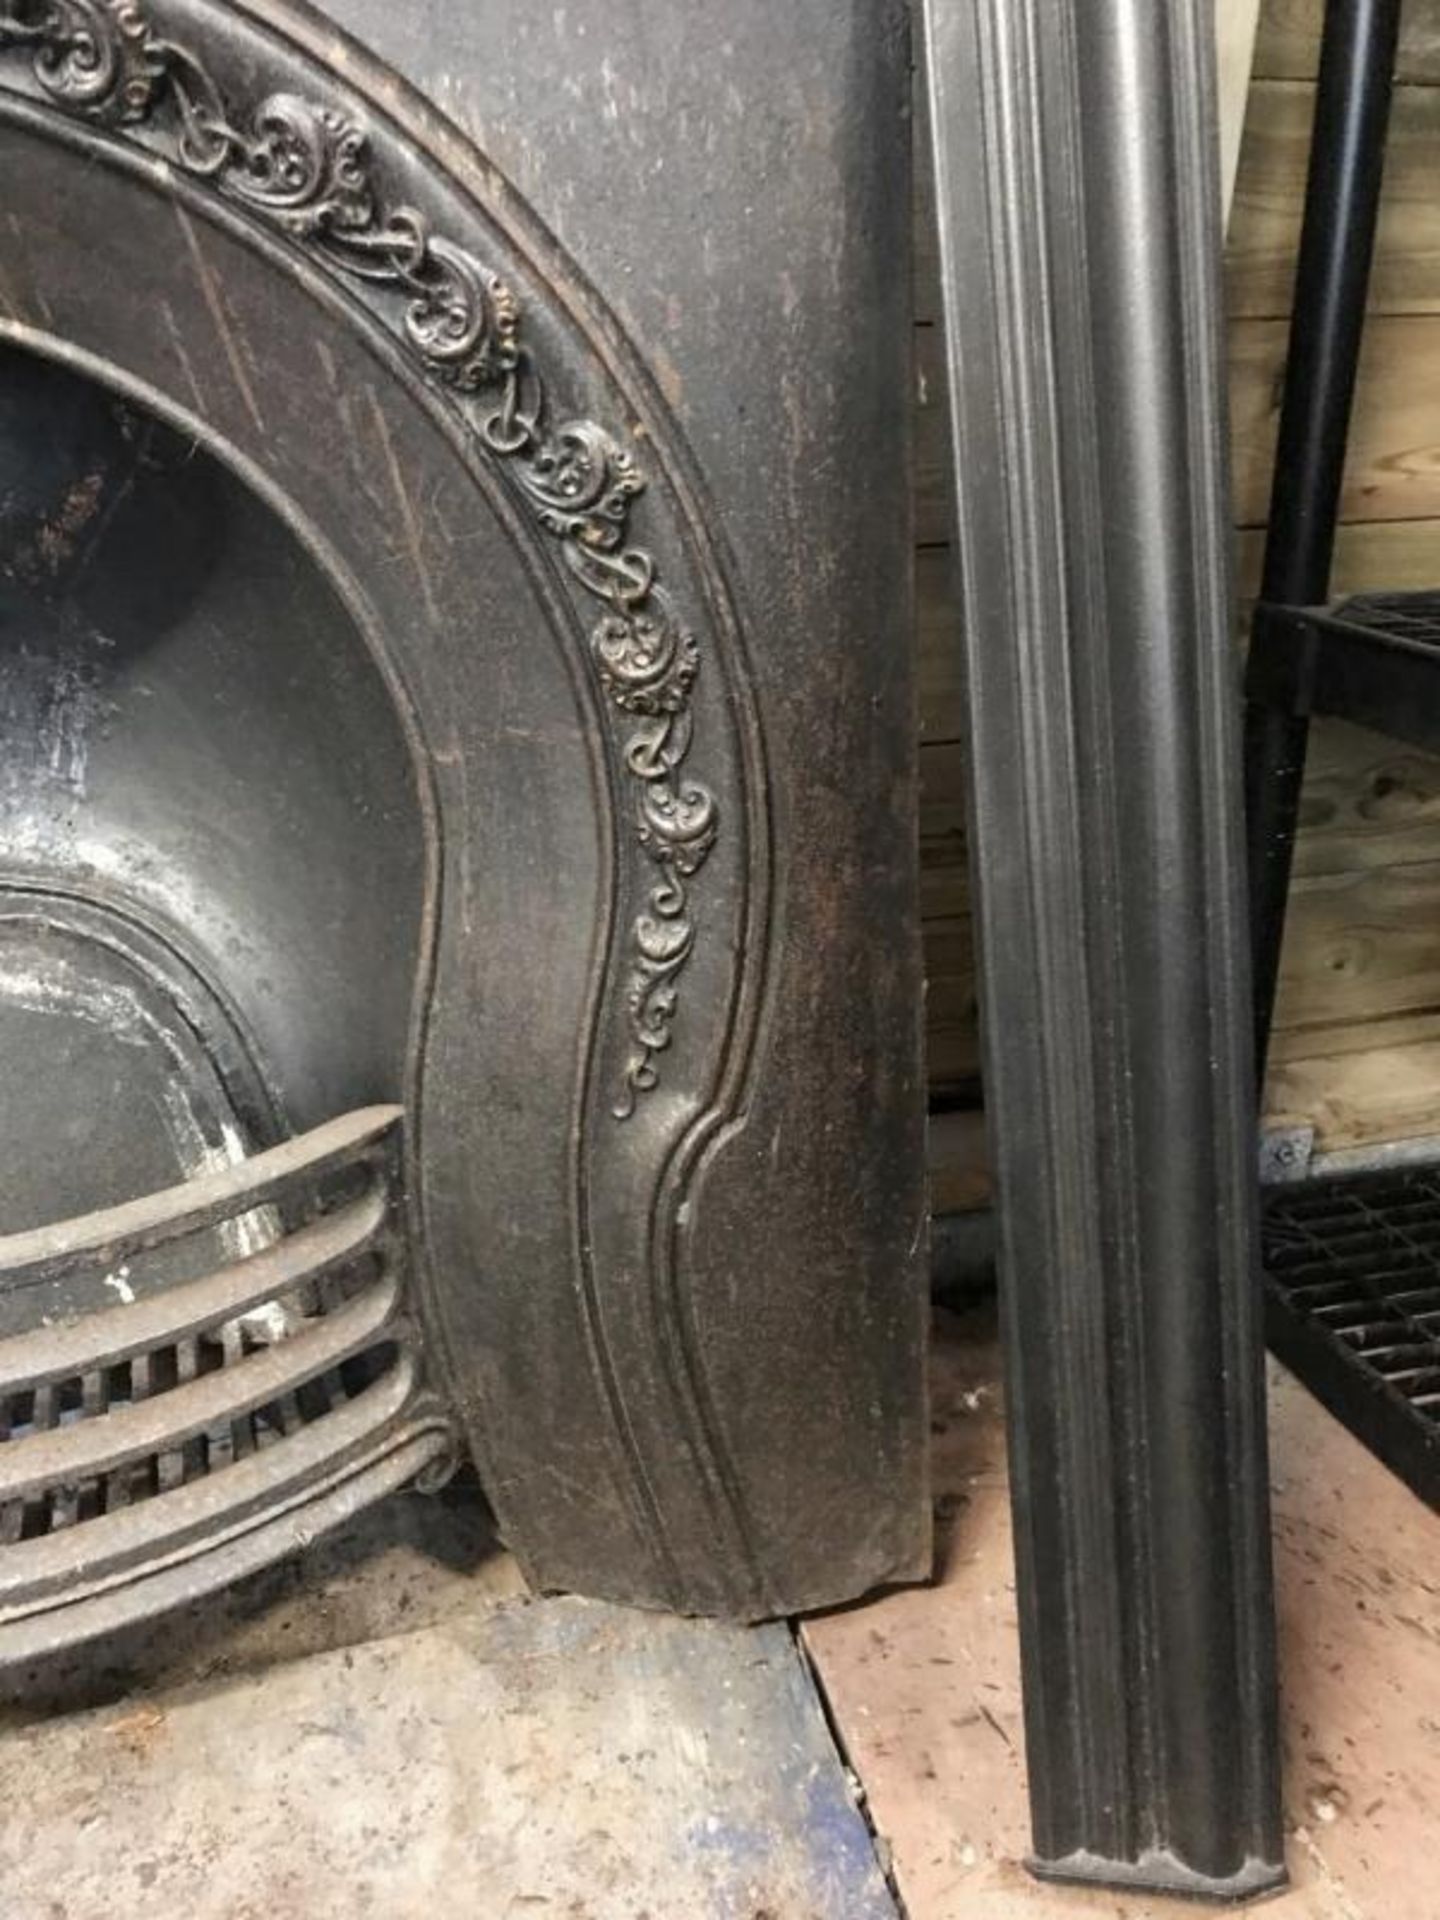 1 x Stunning Antique Victorian Cast Iron Fire Surround with Horseshoe Insert - Dimensions: Height - Image 4 of 9